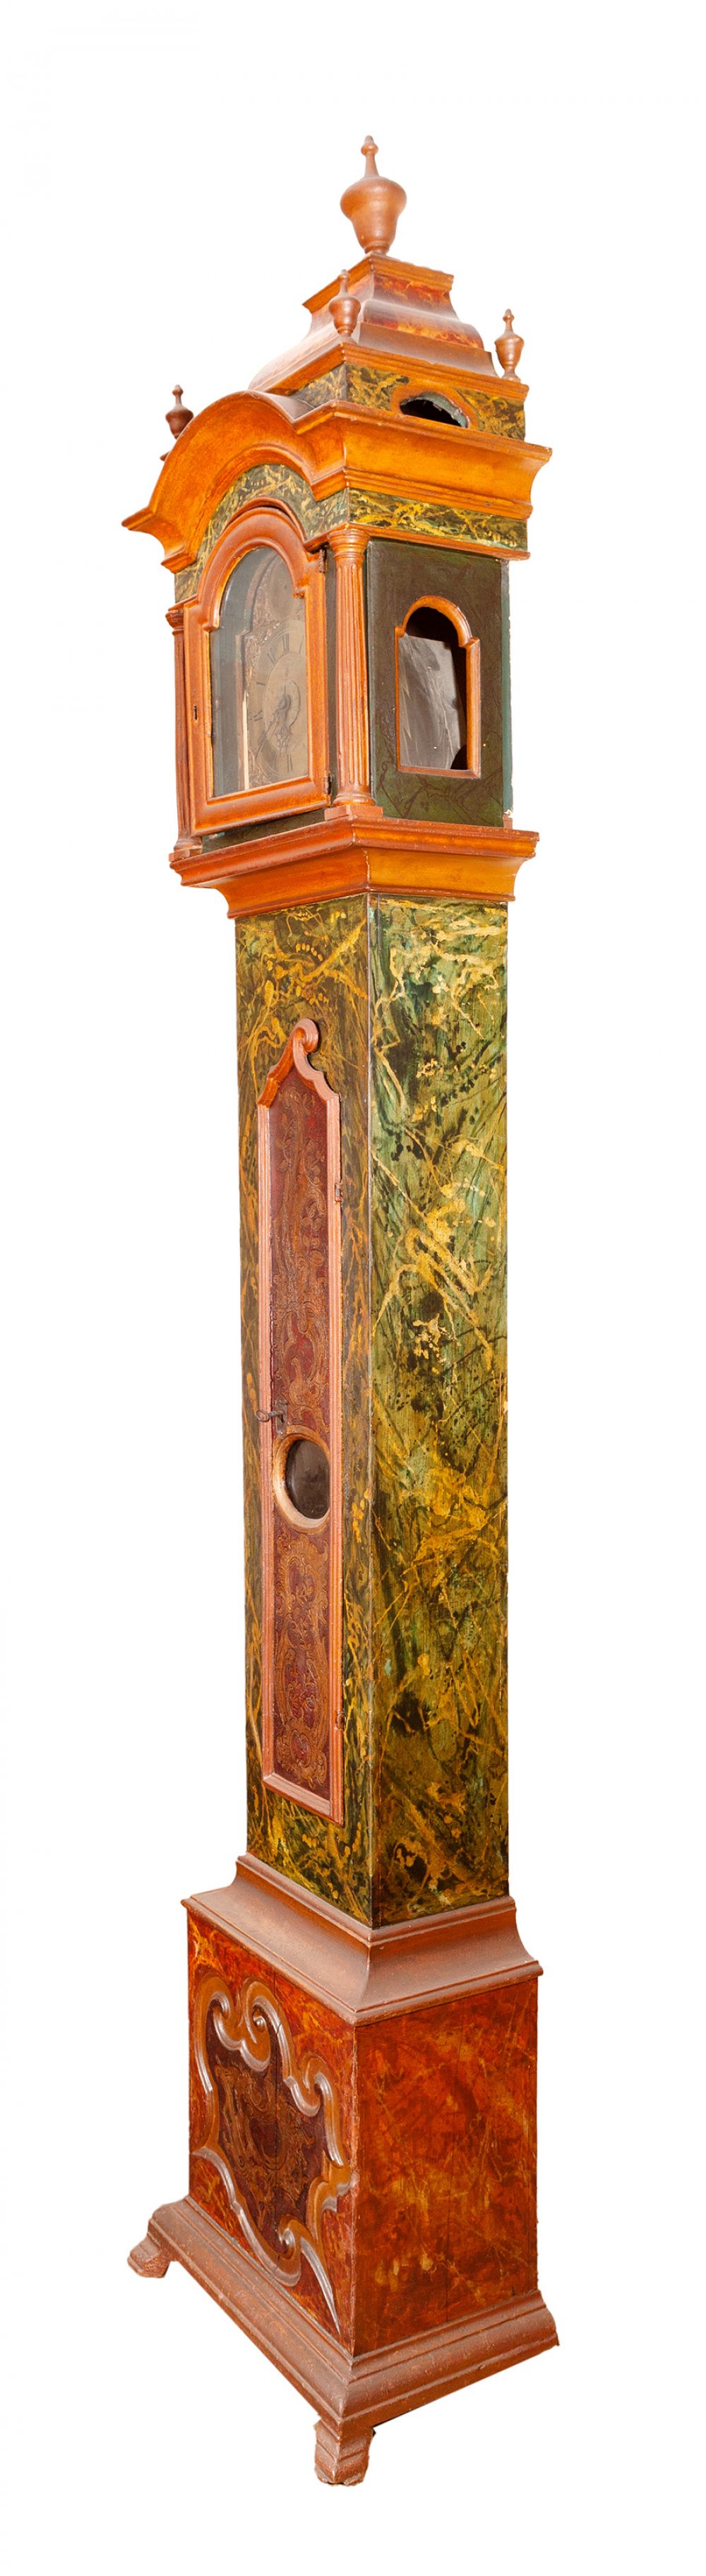 English style grandfather clock, 19th century.Polychrome wood.Requires restoration. On top of the - Image 5 of 7